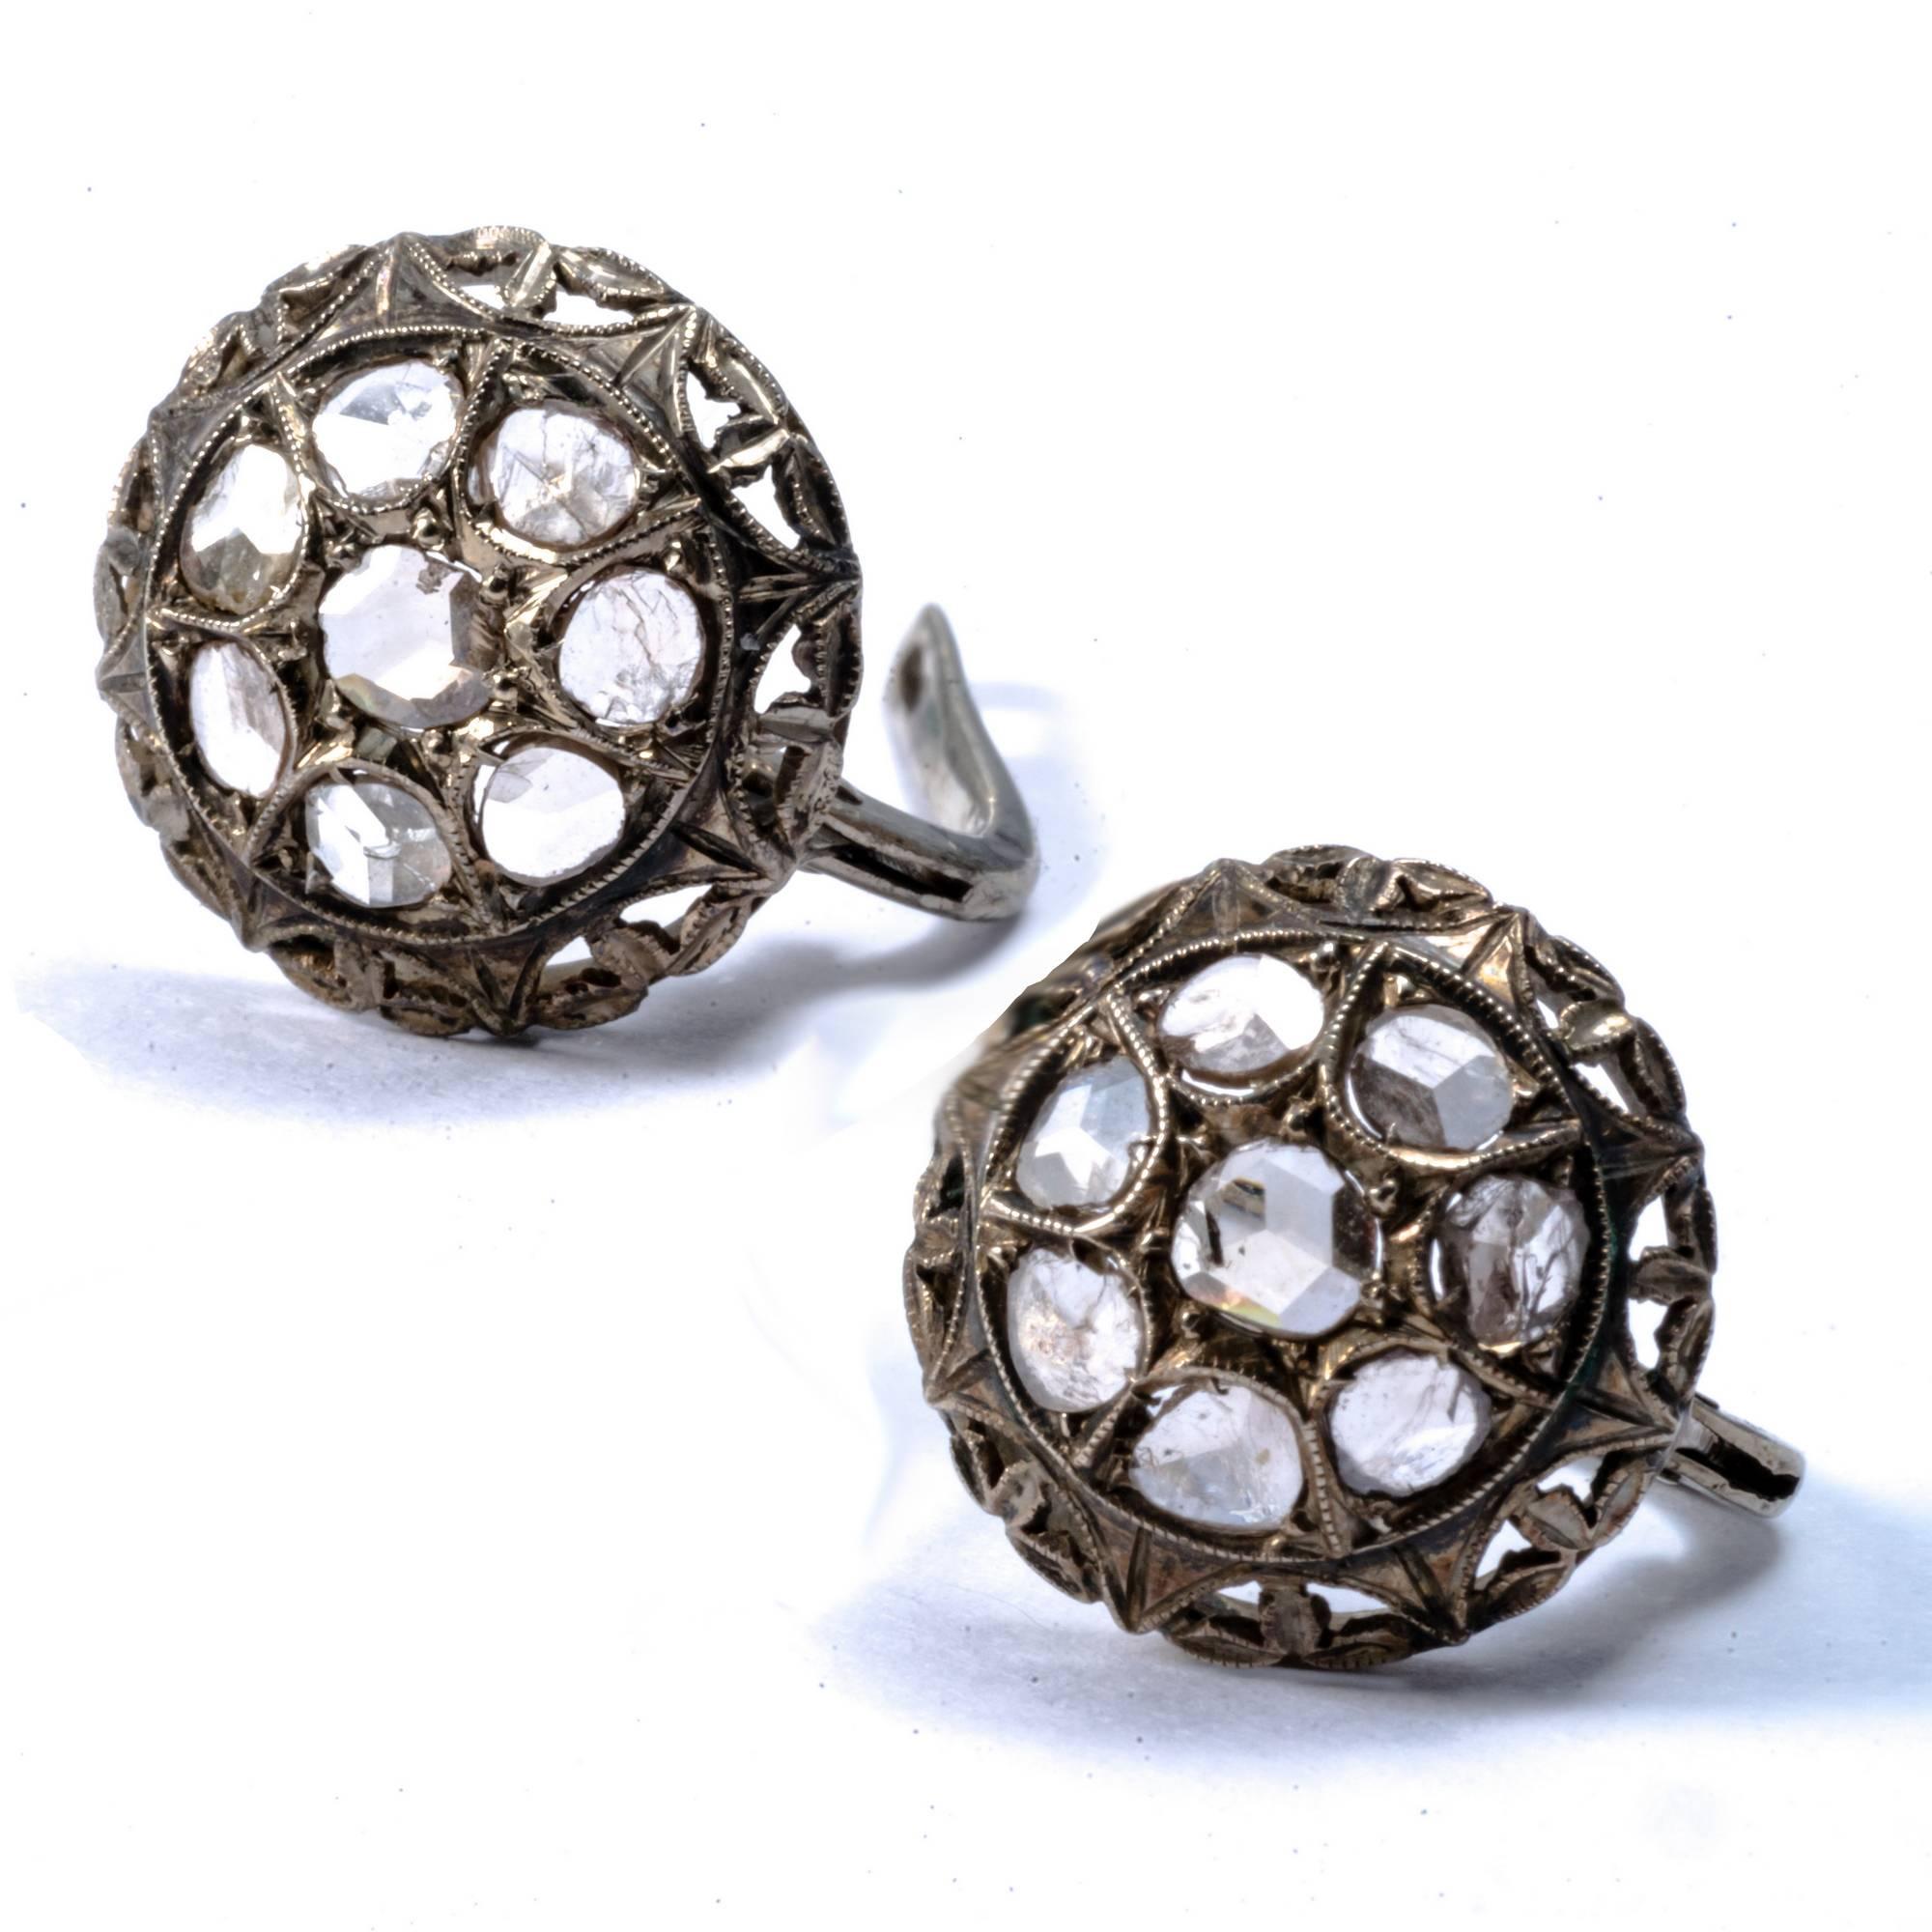 These early Victorian earrings  have a typical round,  dome shape. They are enlightened by 16 rose cut  and mixed cut diamonds. The filgree embellishments exemplifies the accuracy of the Victorian era craftmanship.
Earrings fitted for pierced ears.